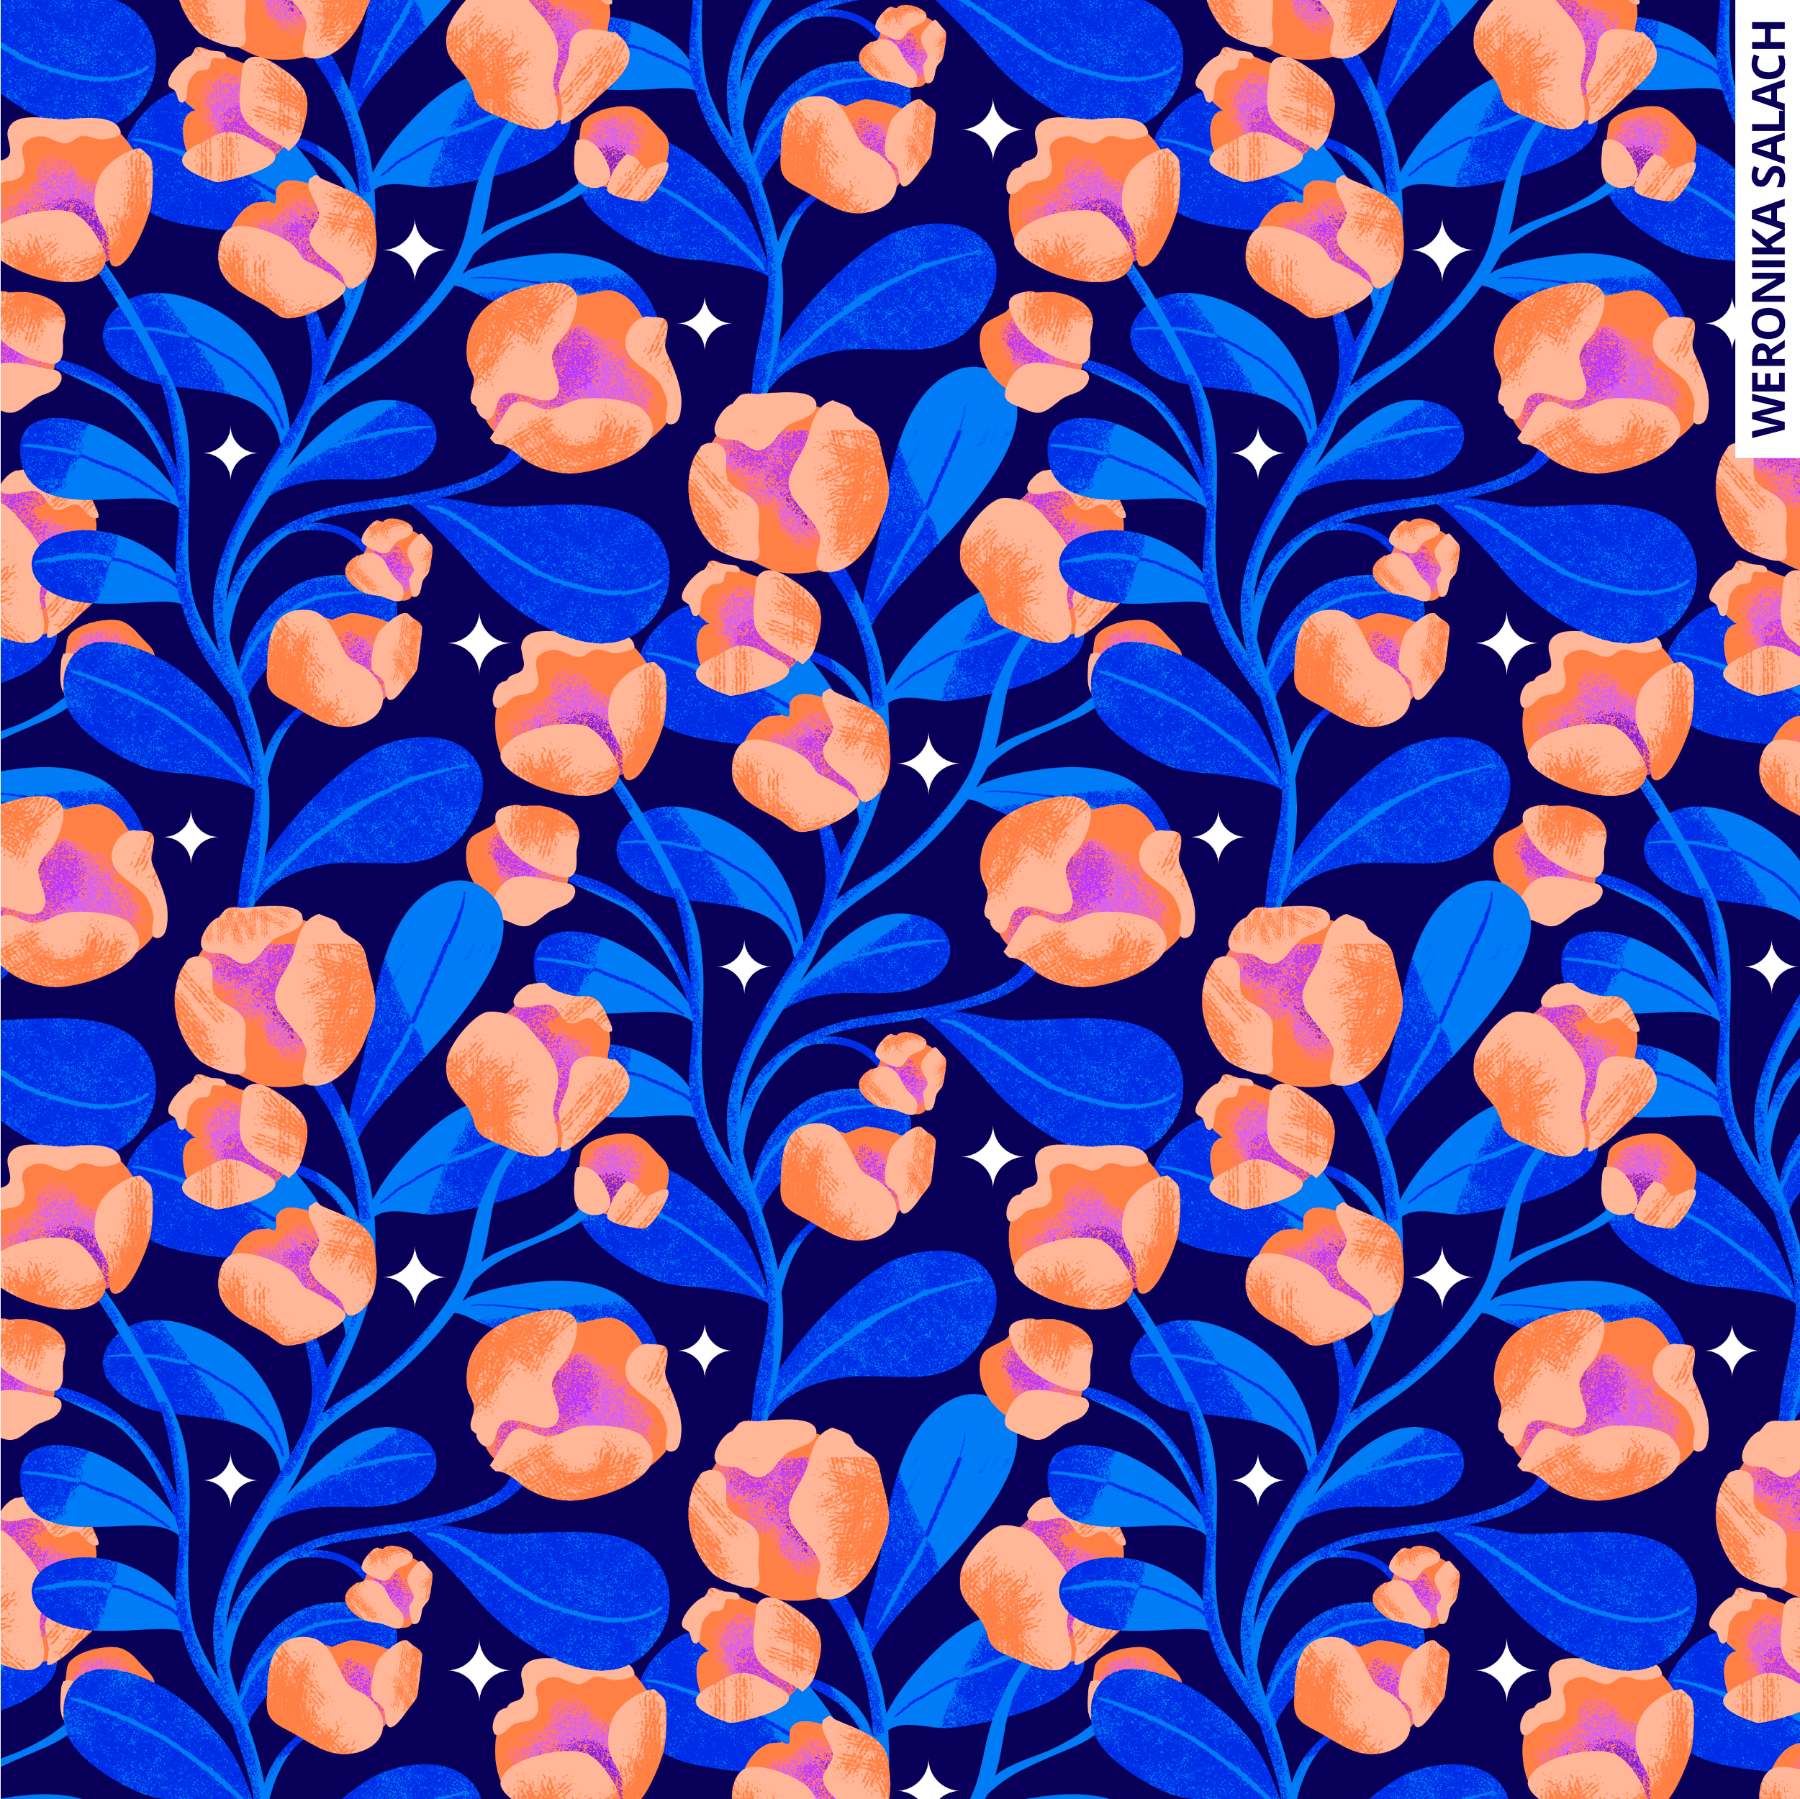 WS_repeat pattern_midnight florals dark background ornage blooms_4.png